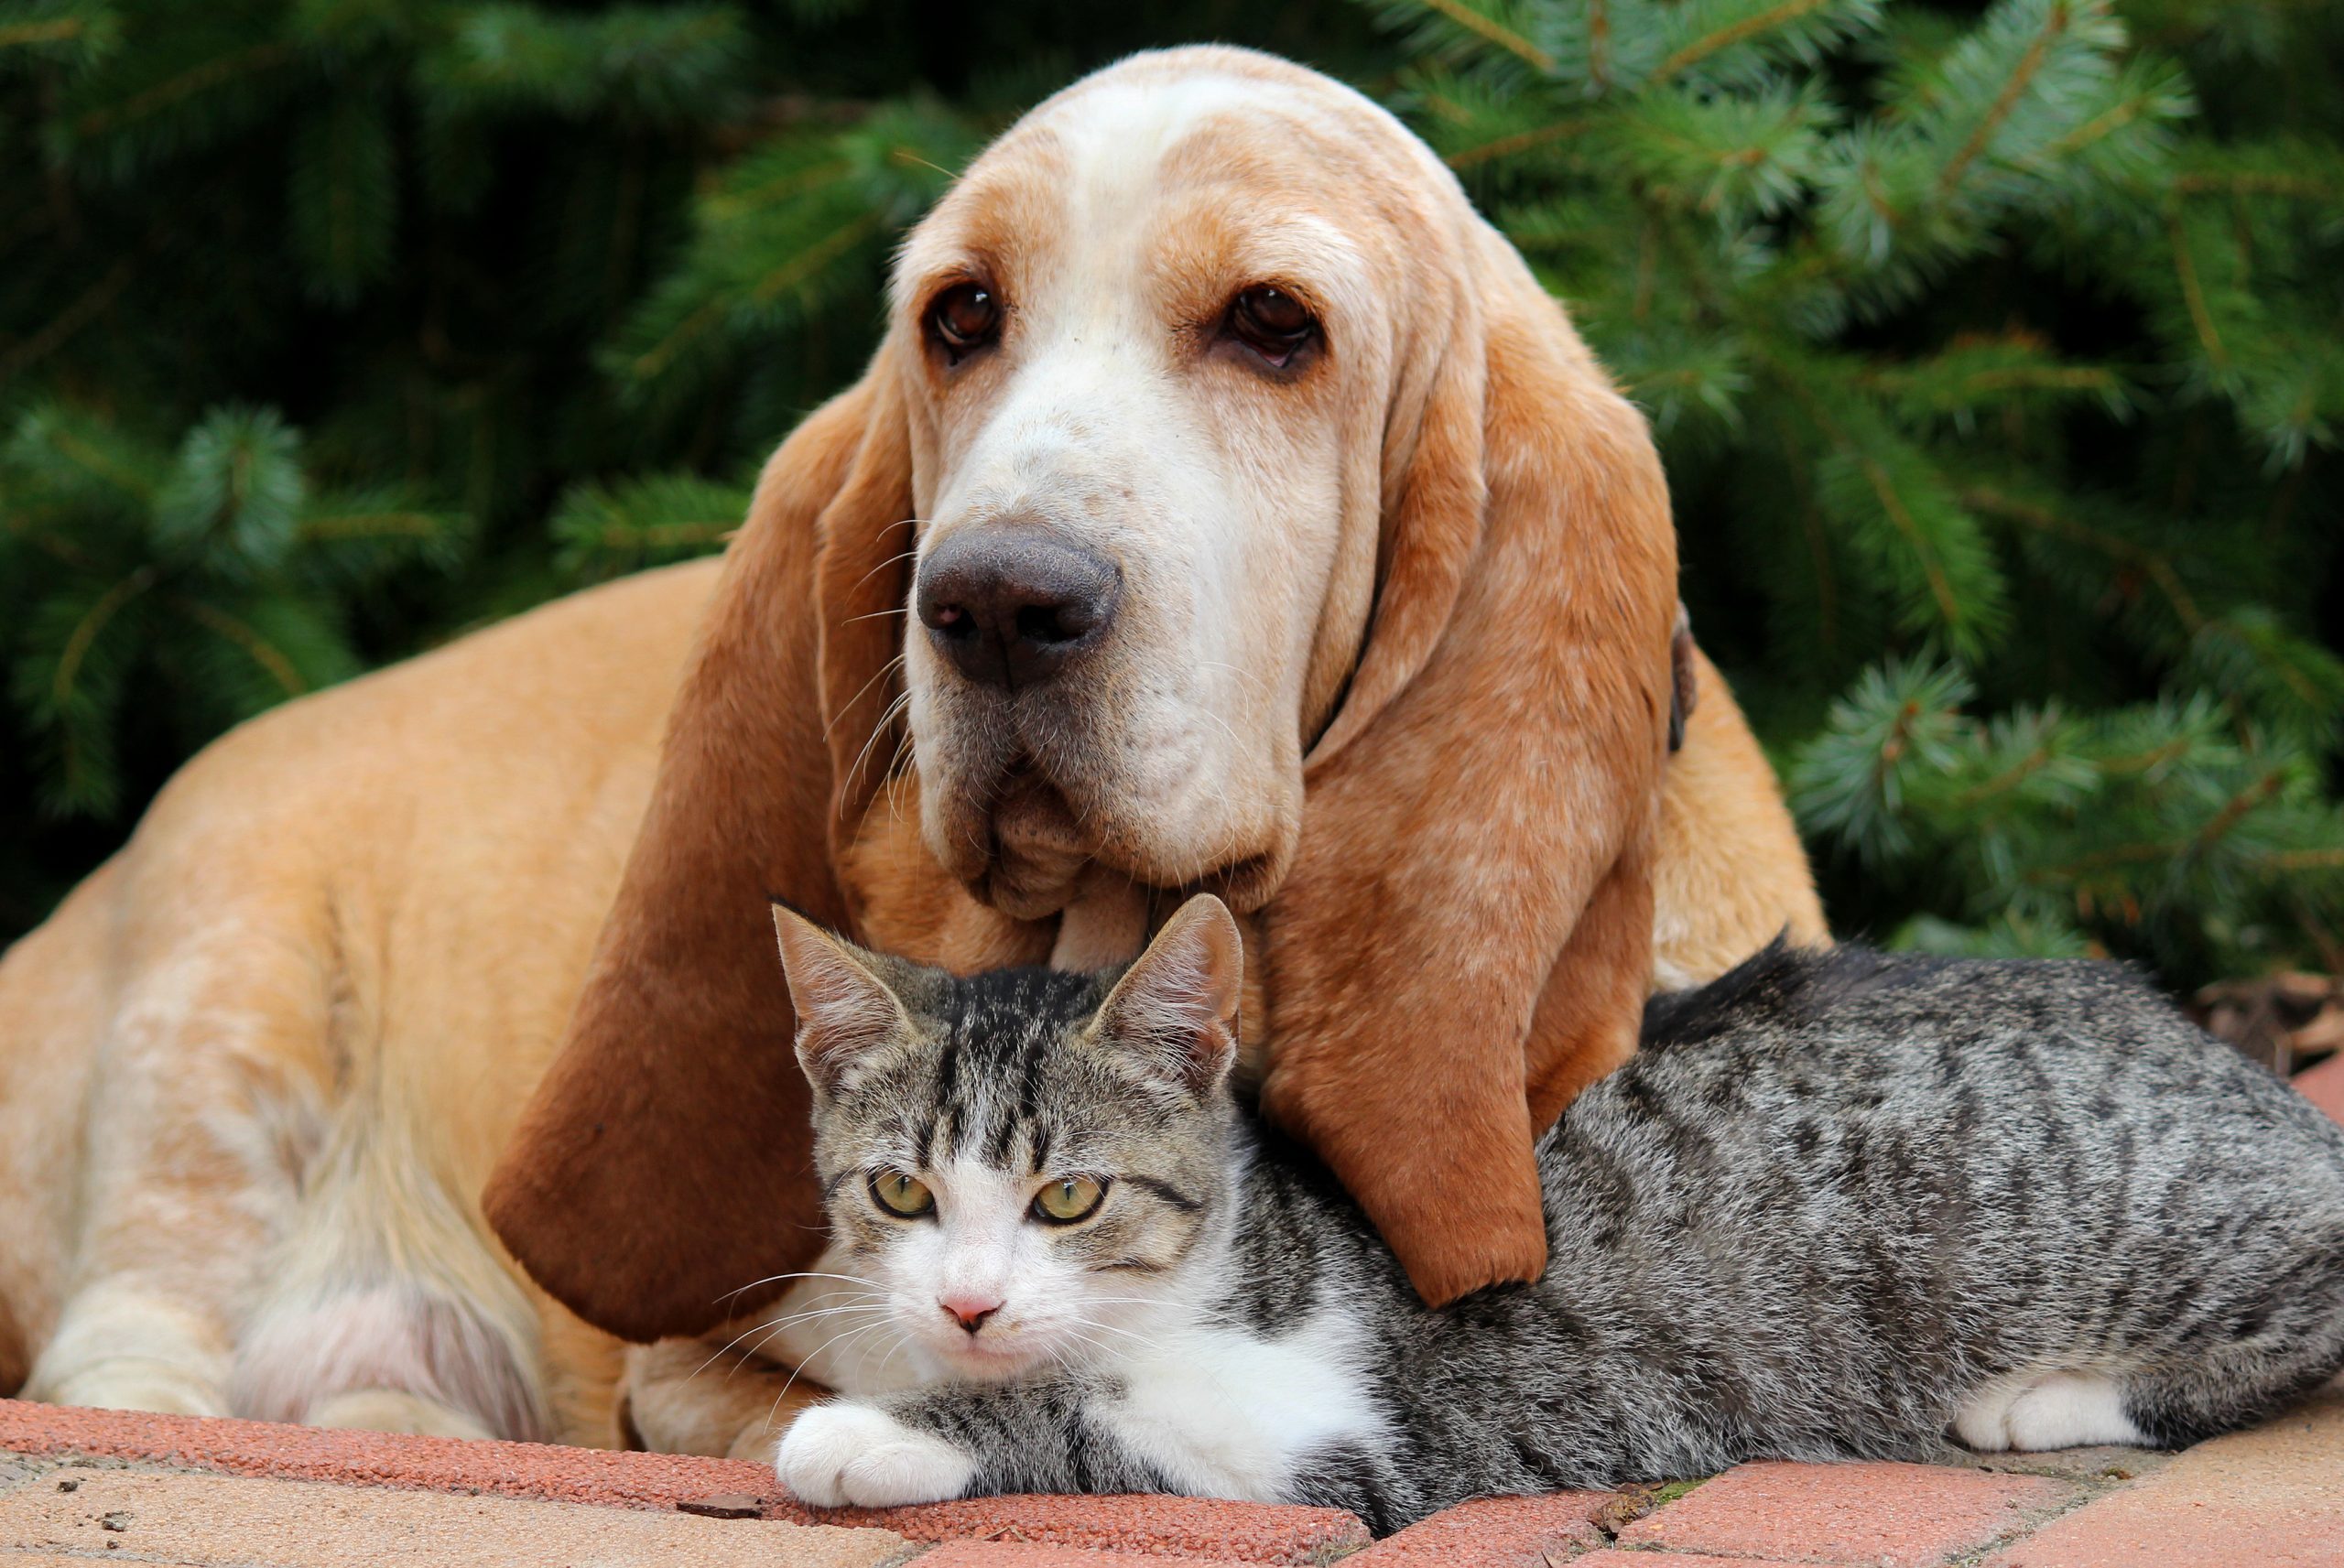 are there dog breeds that get along with cats